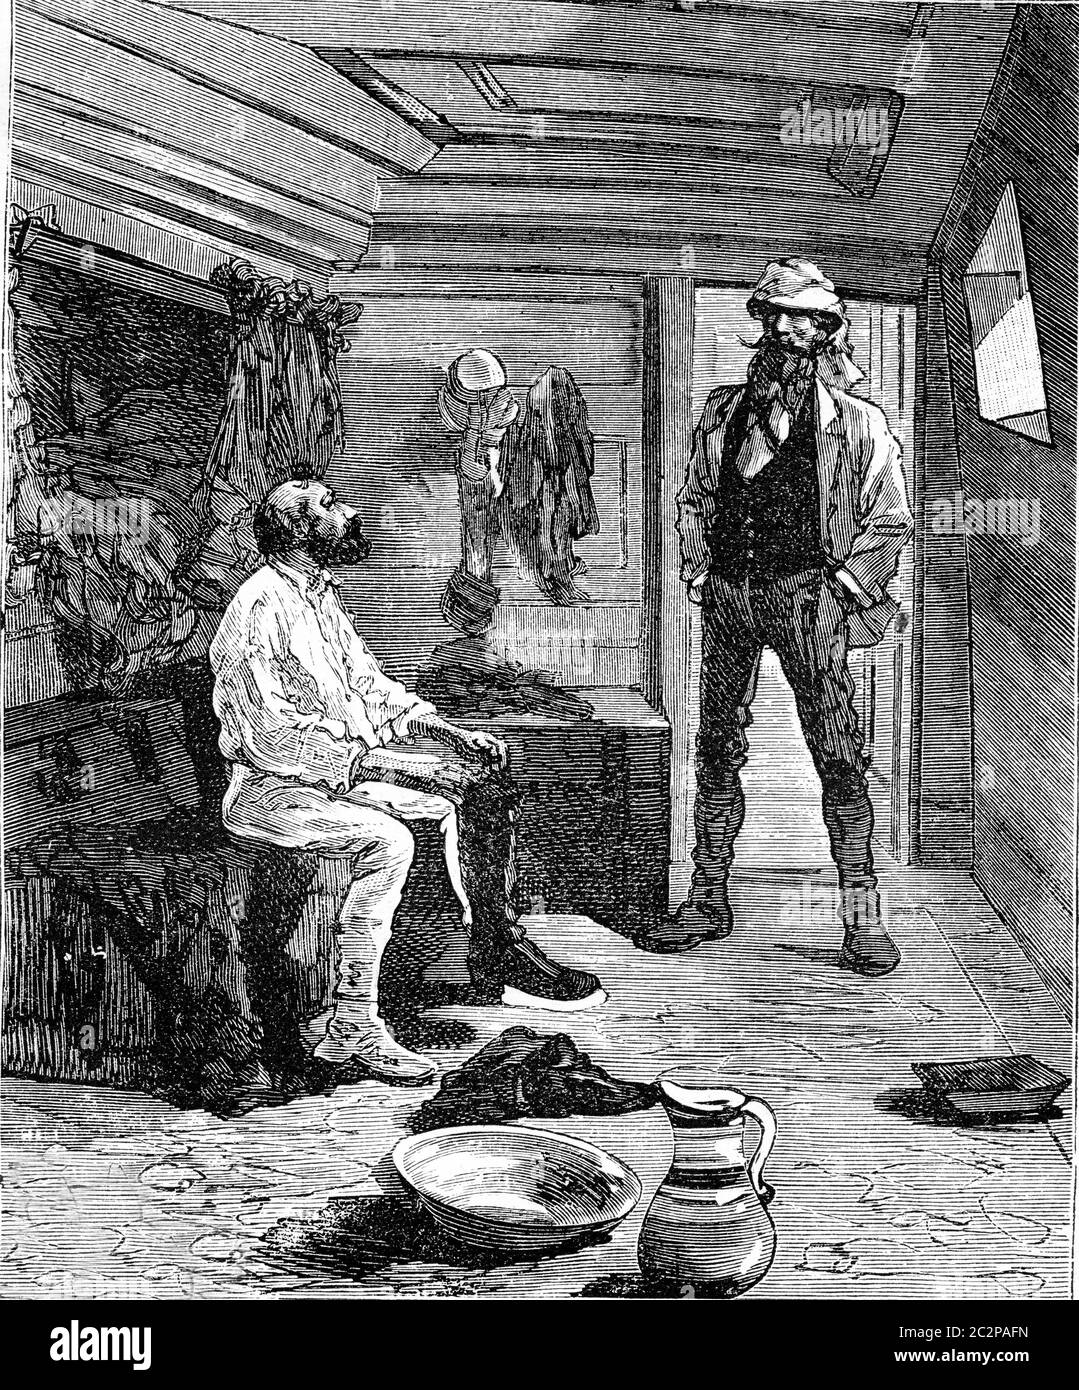 Six thousand miles through South America. The next morning aboard the Scotia. From Travel Diaries, vintage engraving, 1884-85. Stock Photo